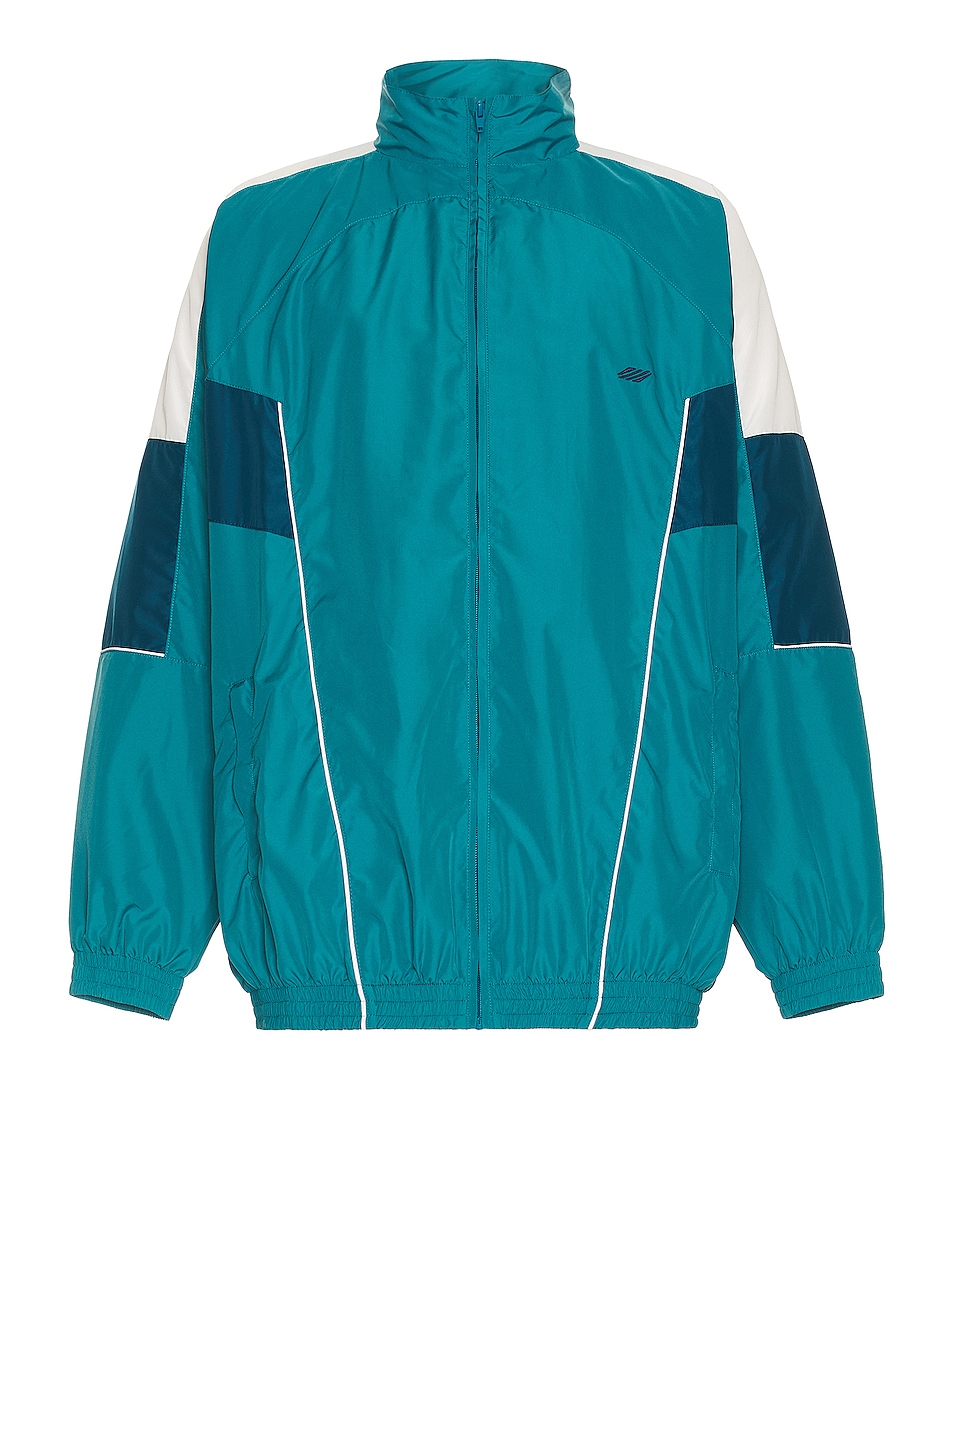 Image 1 of Martine Rose Oversized Panelled Track Jacket in Teal & White